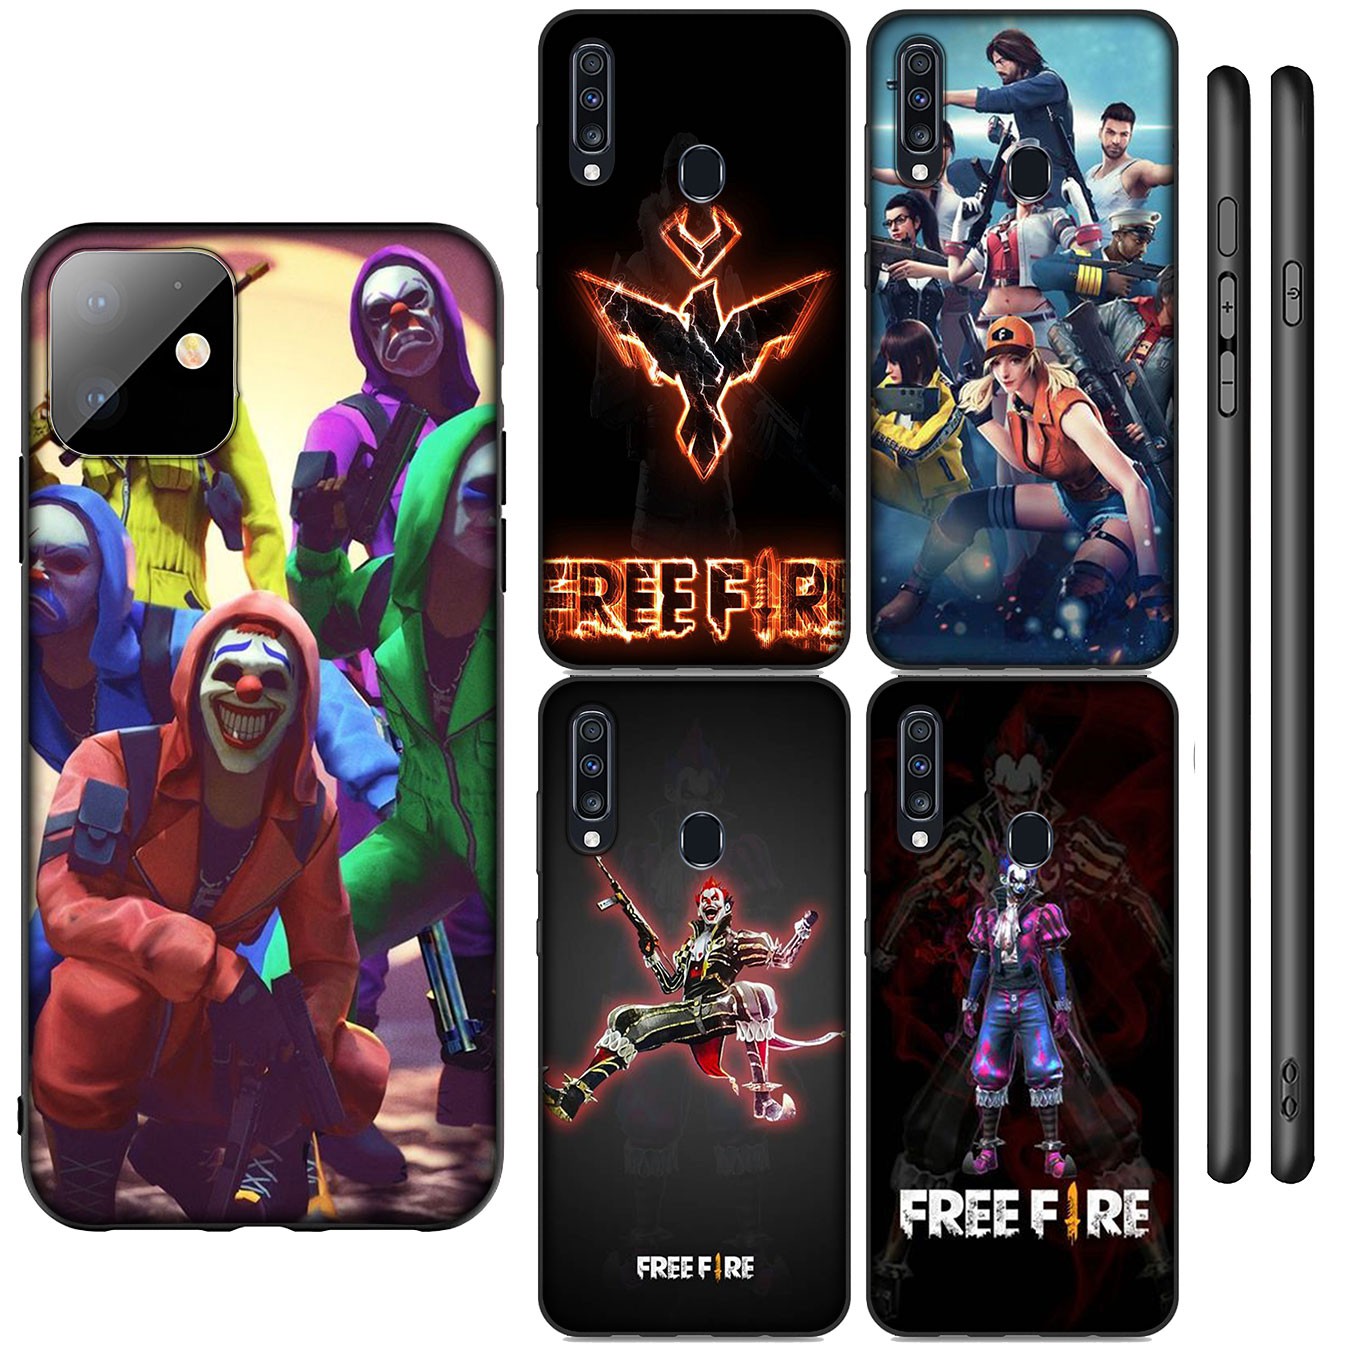 Samsung Galaxy S21 Ultra S8 Plus F62 M62 A2 A32 A52 A72 S21+ S8+ S21Plus Casing Soft Silicone Free fire Game Phone Case